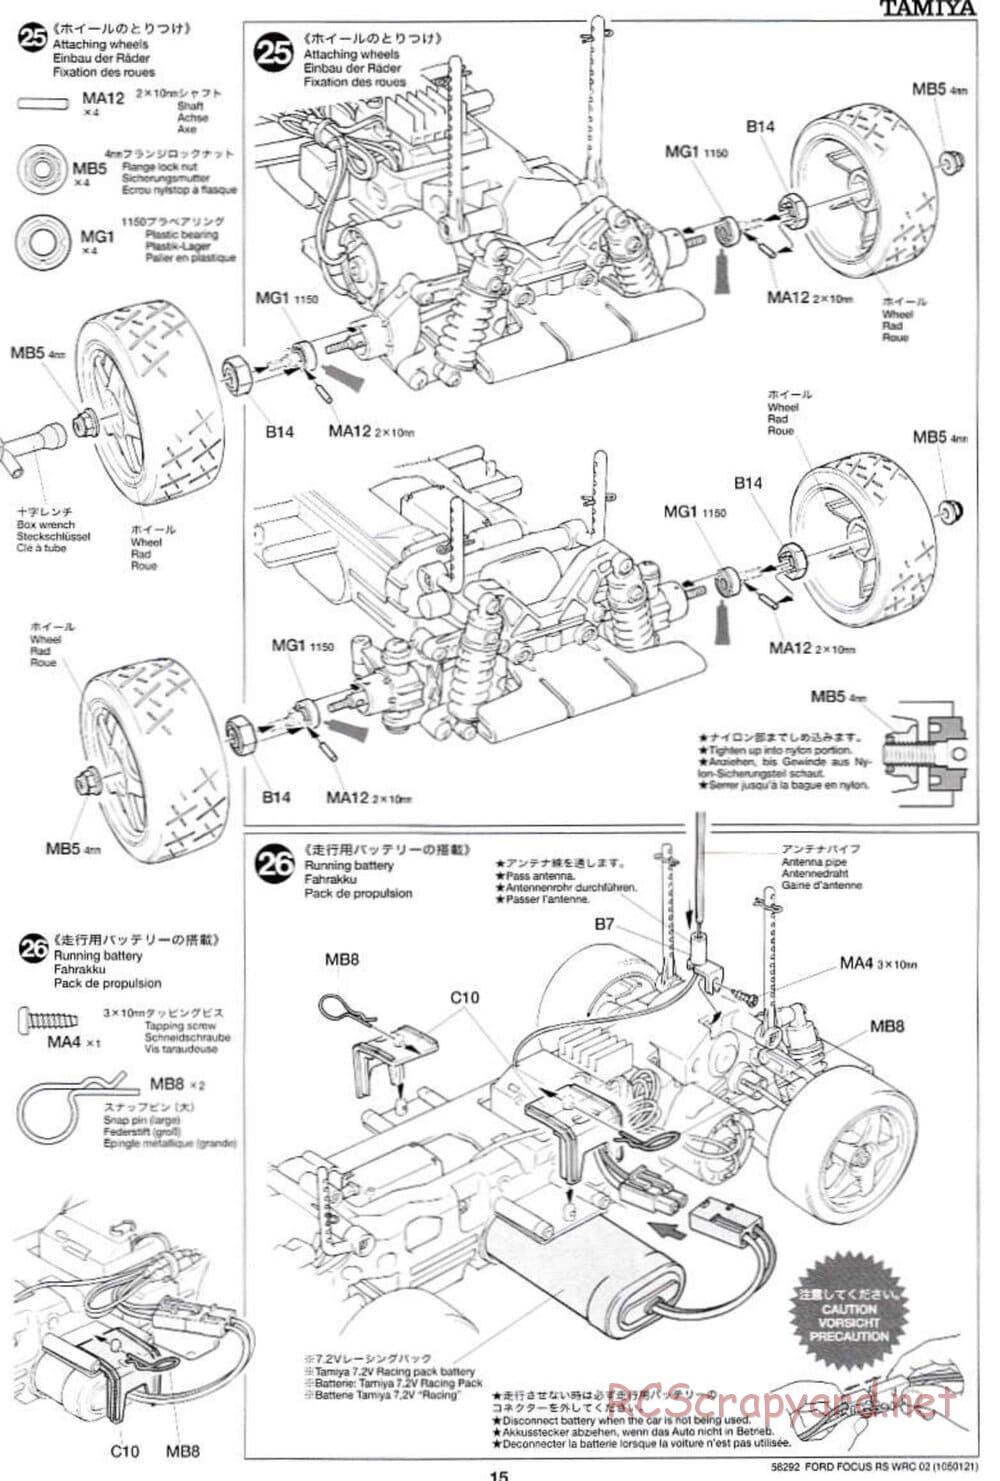 Tamiya - Ford Focus RS WRC 02 - TL-01 Chassis - Manual - Page 15